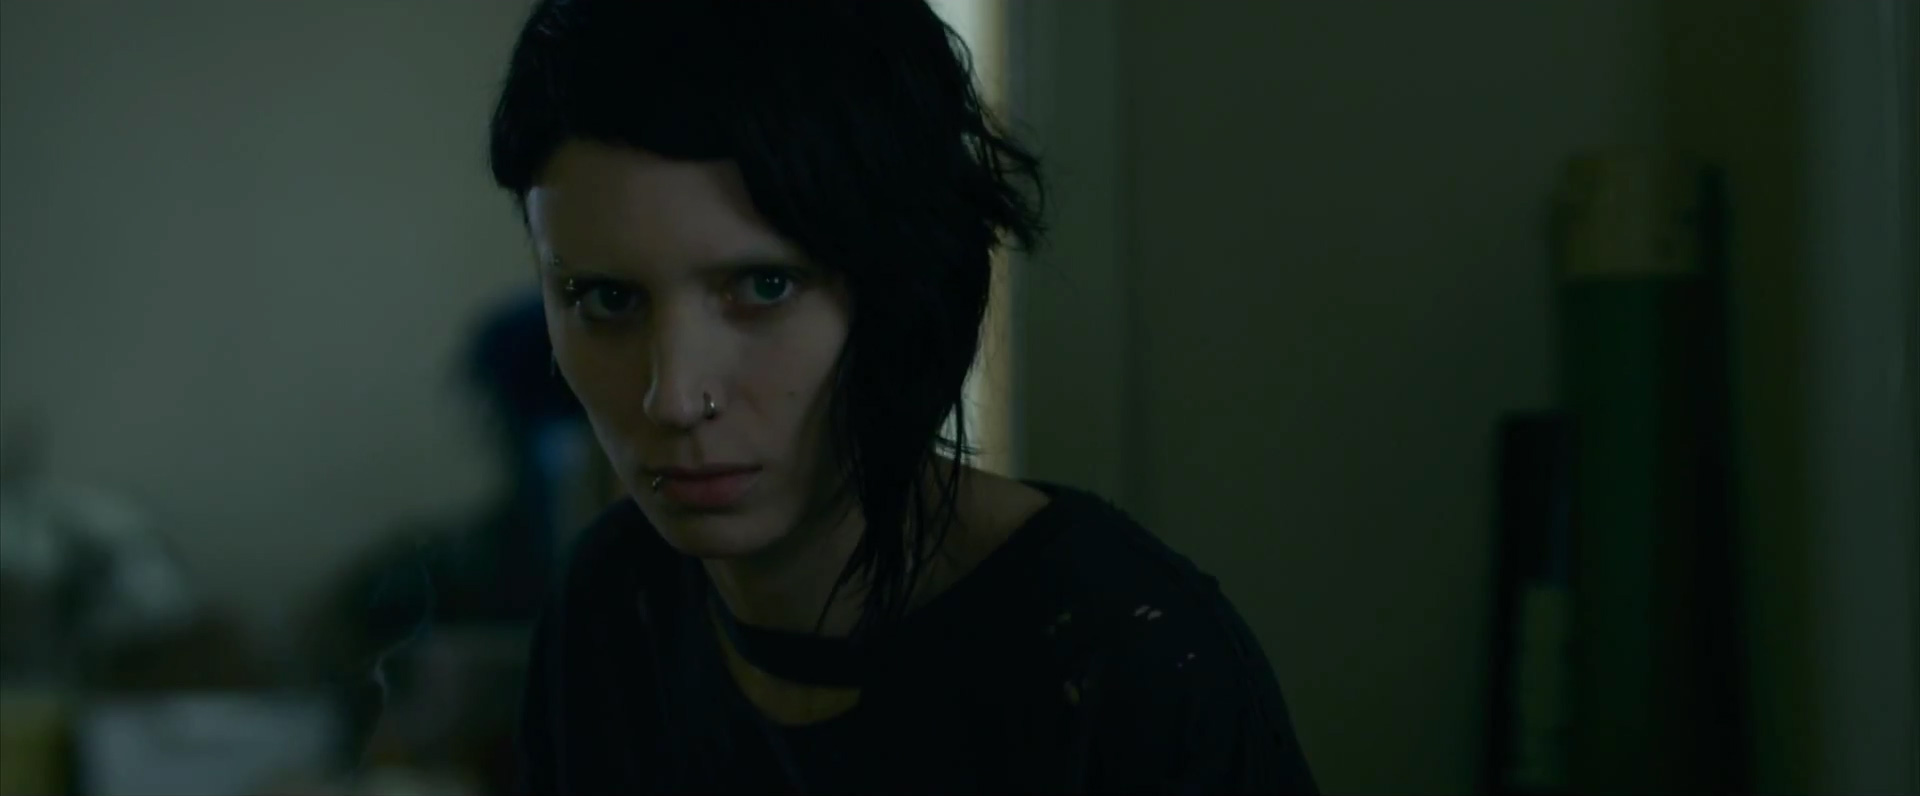 The Girl With The Dragon Tattoo #6